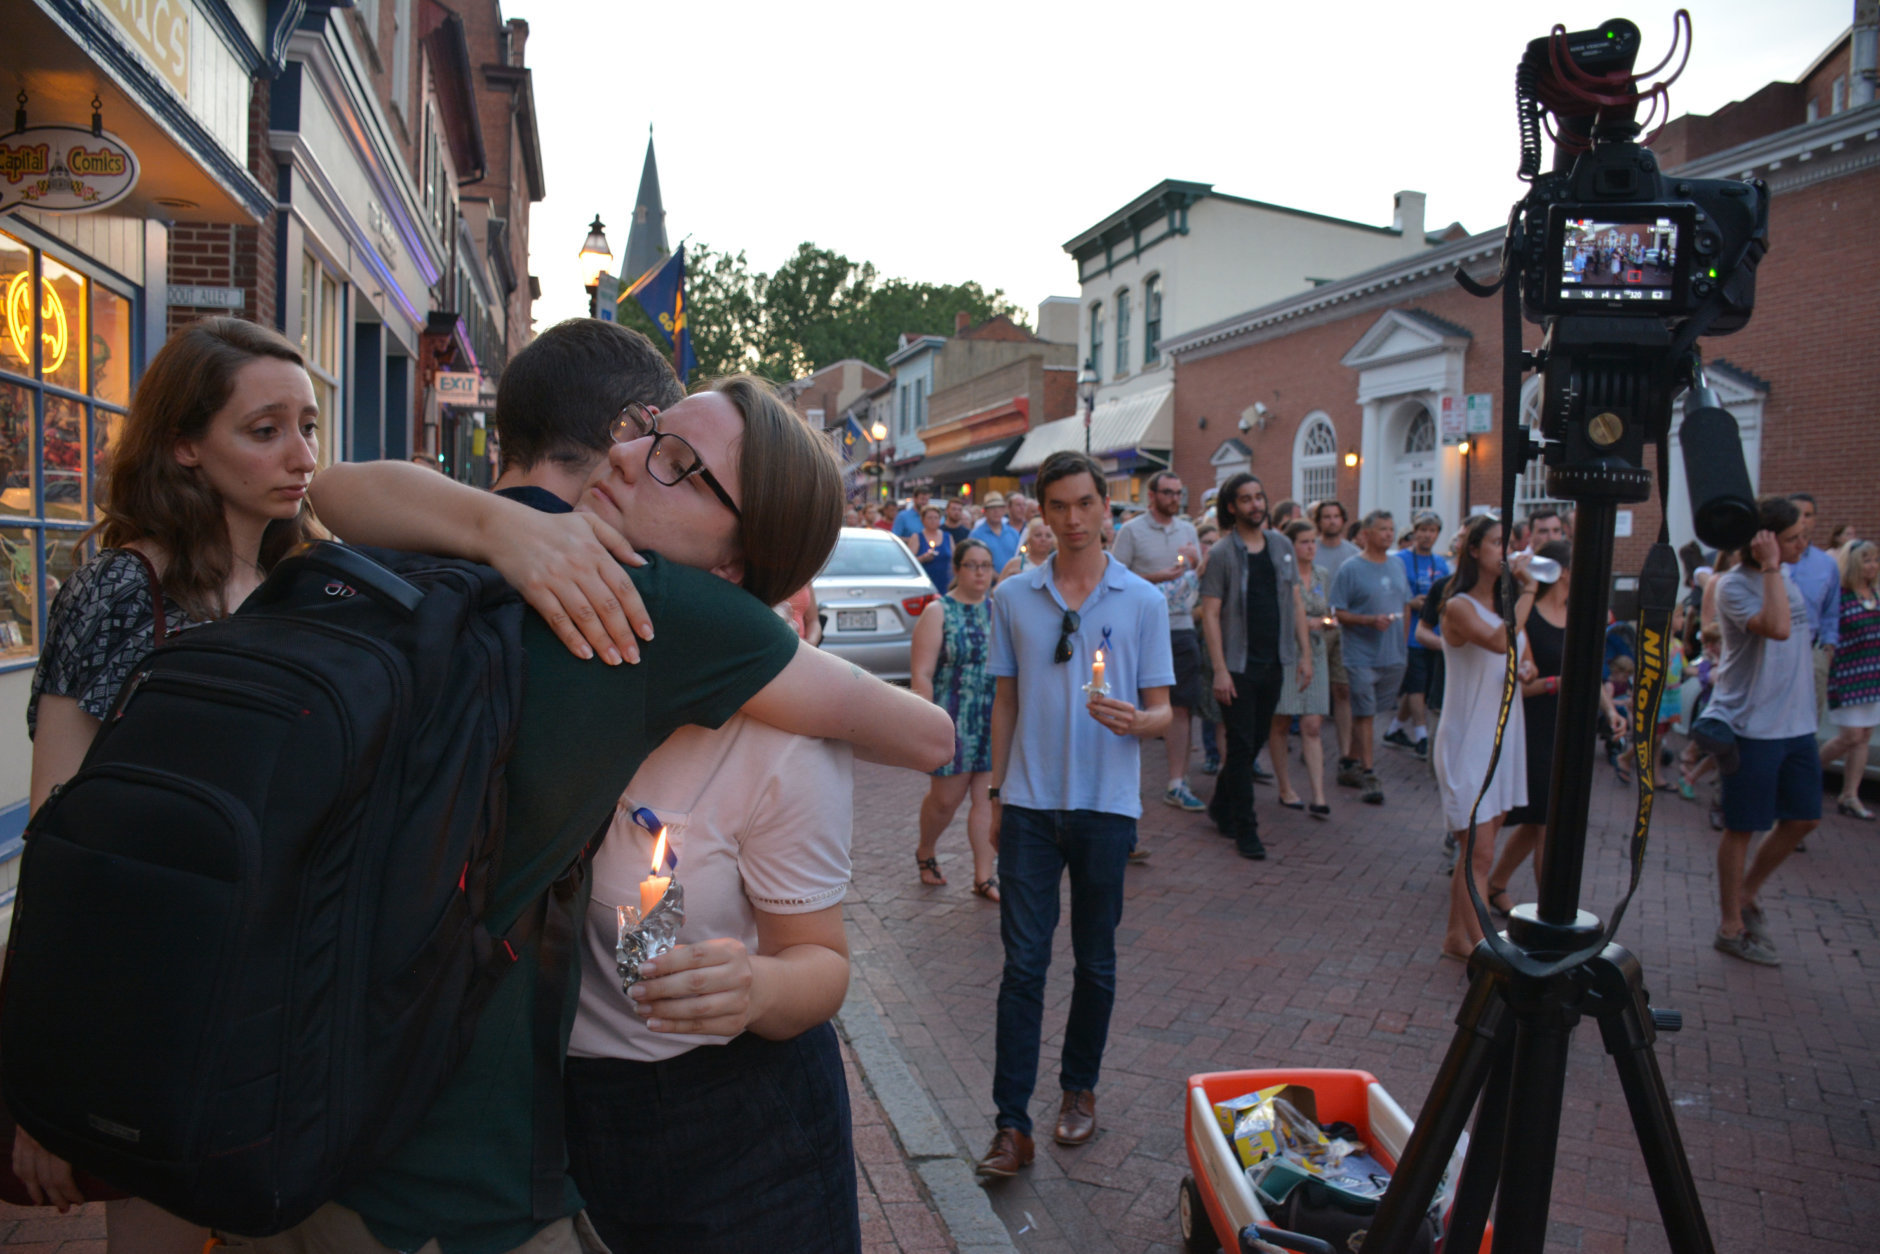 Baltimore Sun videographer Ulysses Muñoz gives a hug during a Friday night vigil in downtown Annapolis for victims killed in a shooting at the Capital Gazette in Annapolis, Maryland. (Courtesy/Bethany Swain)